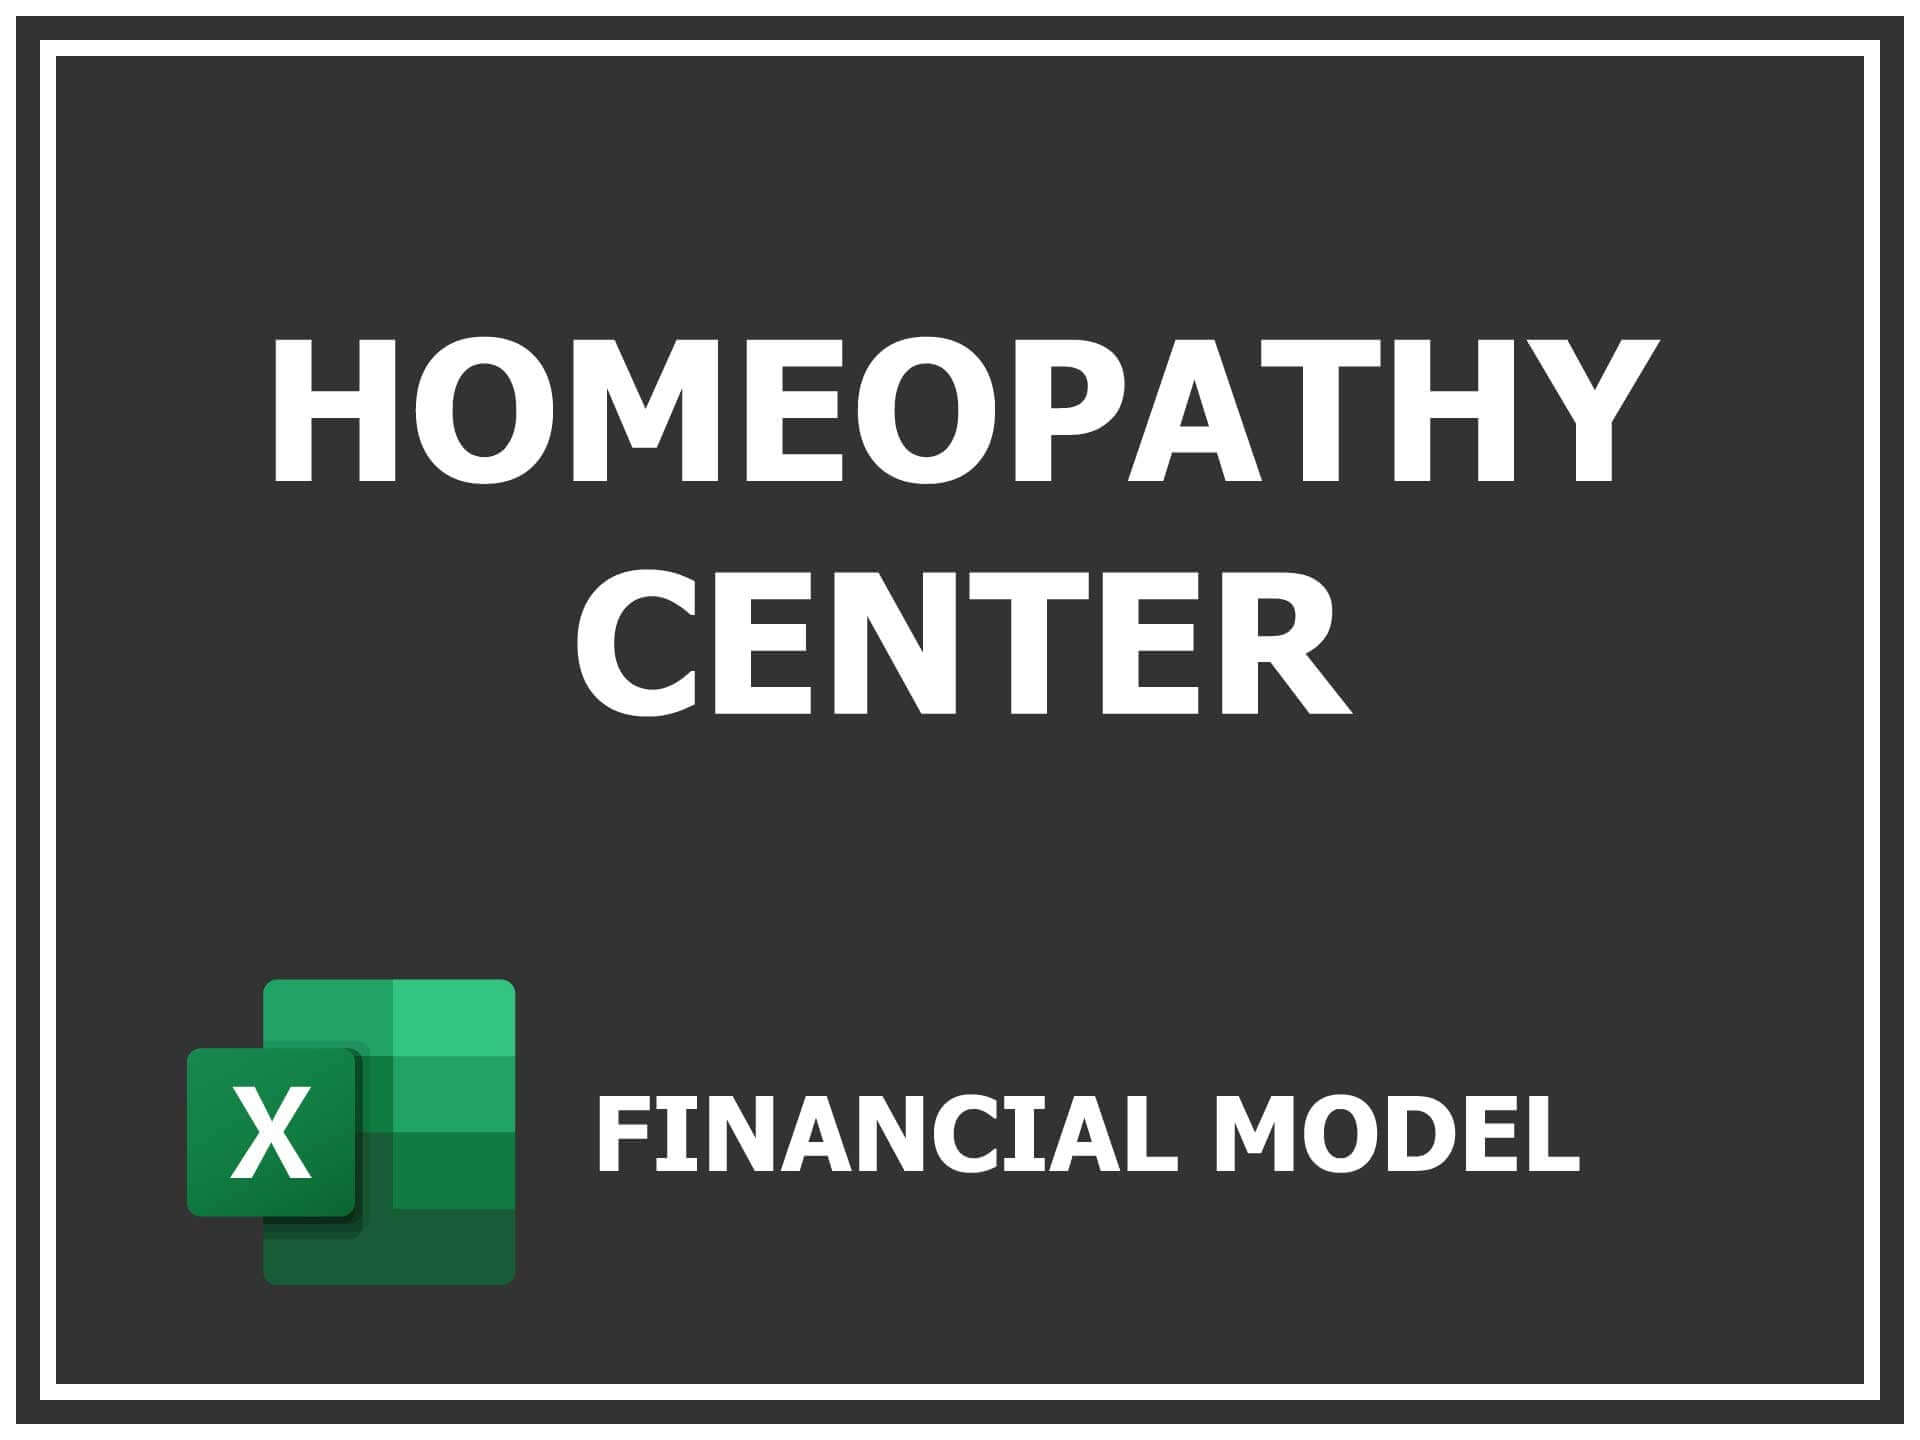 Homeopathy Center